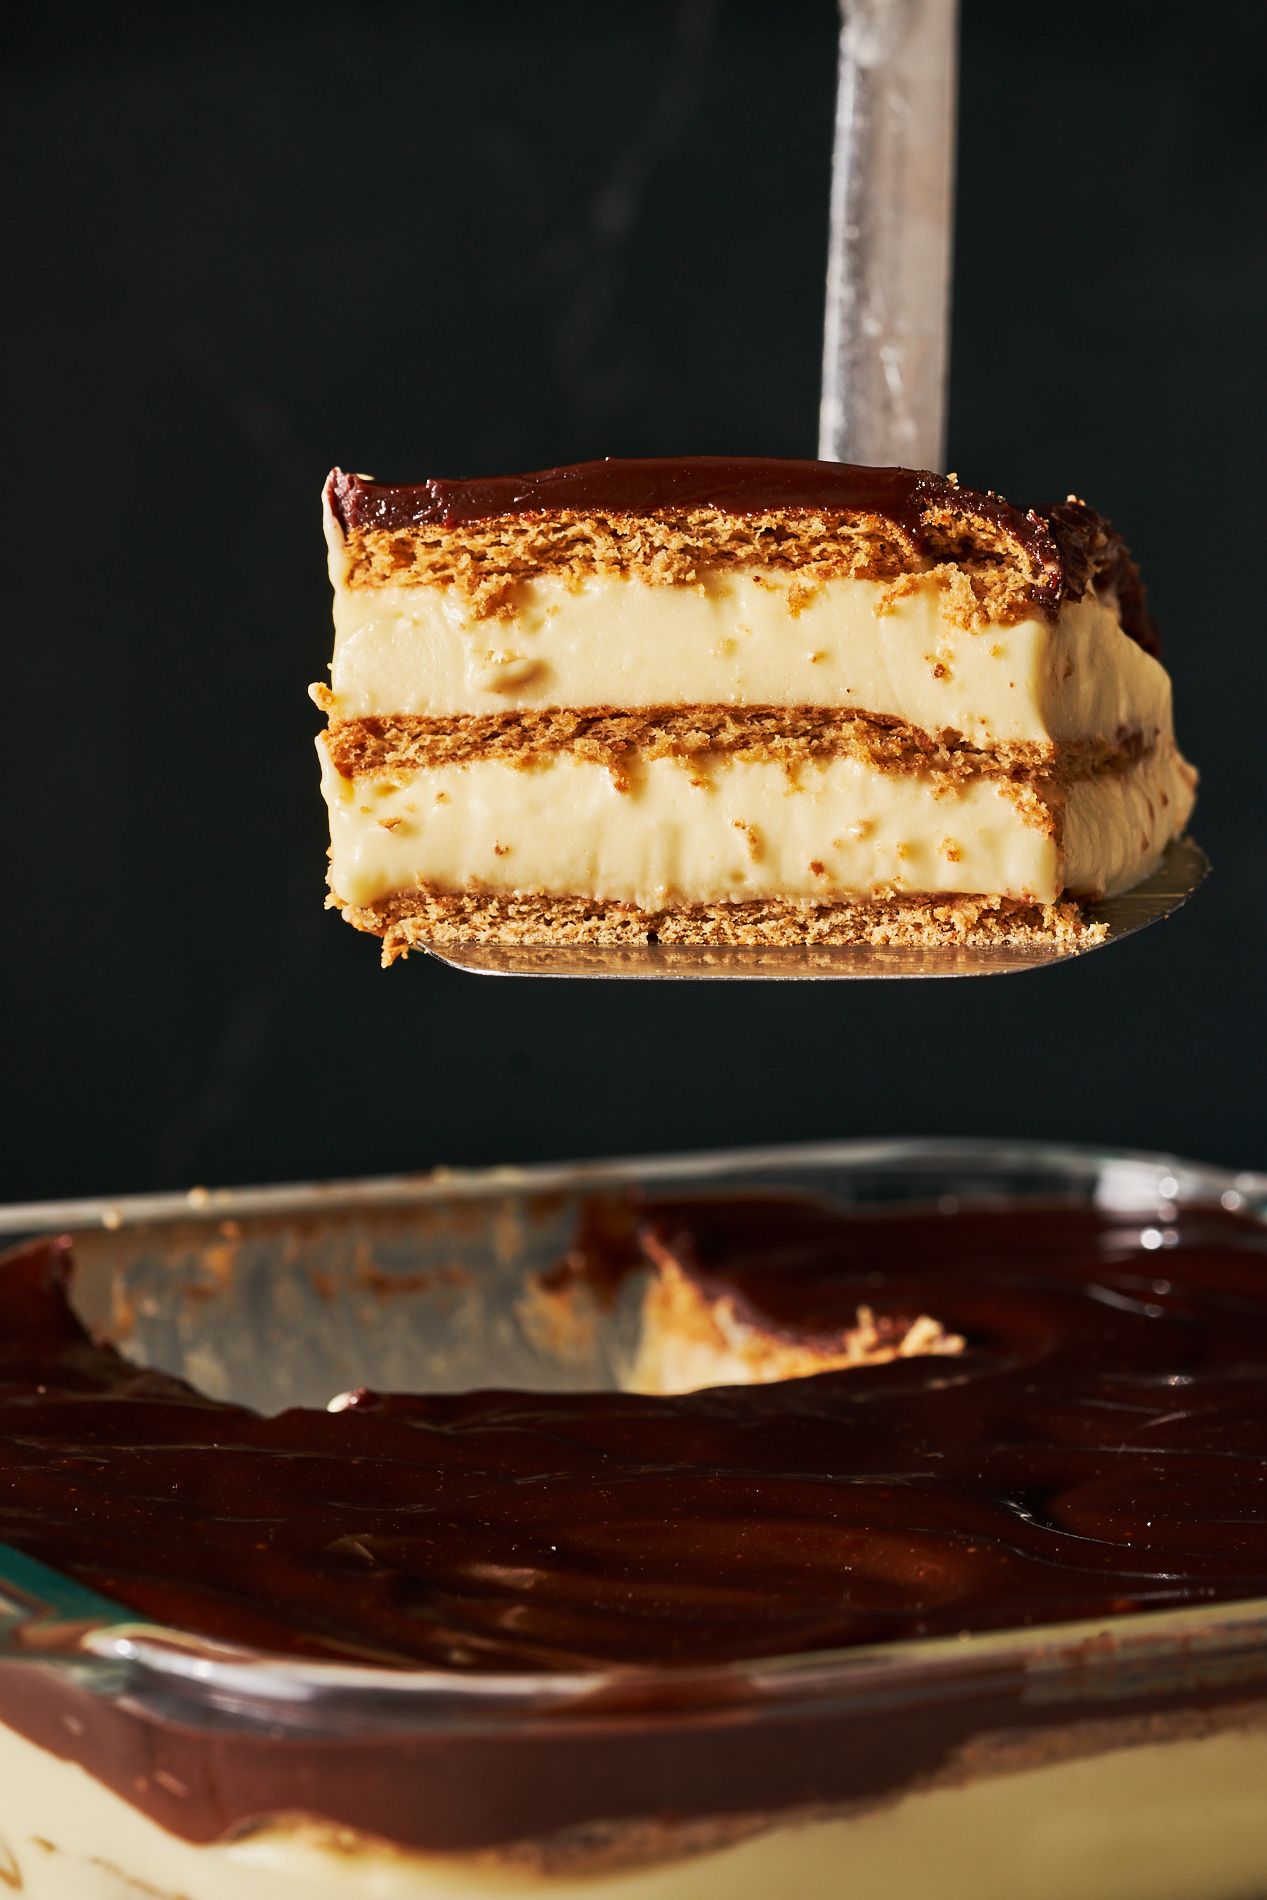 No Bake Peanut Butter Icebox Cake - Crazy for Crust